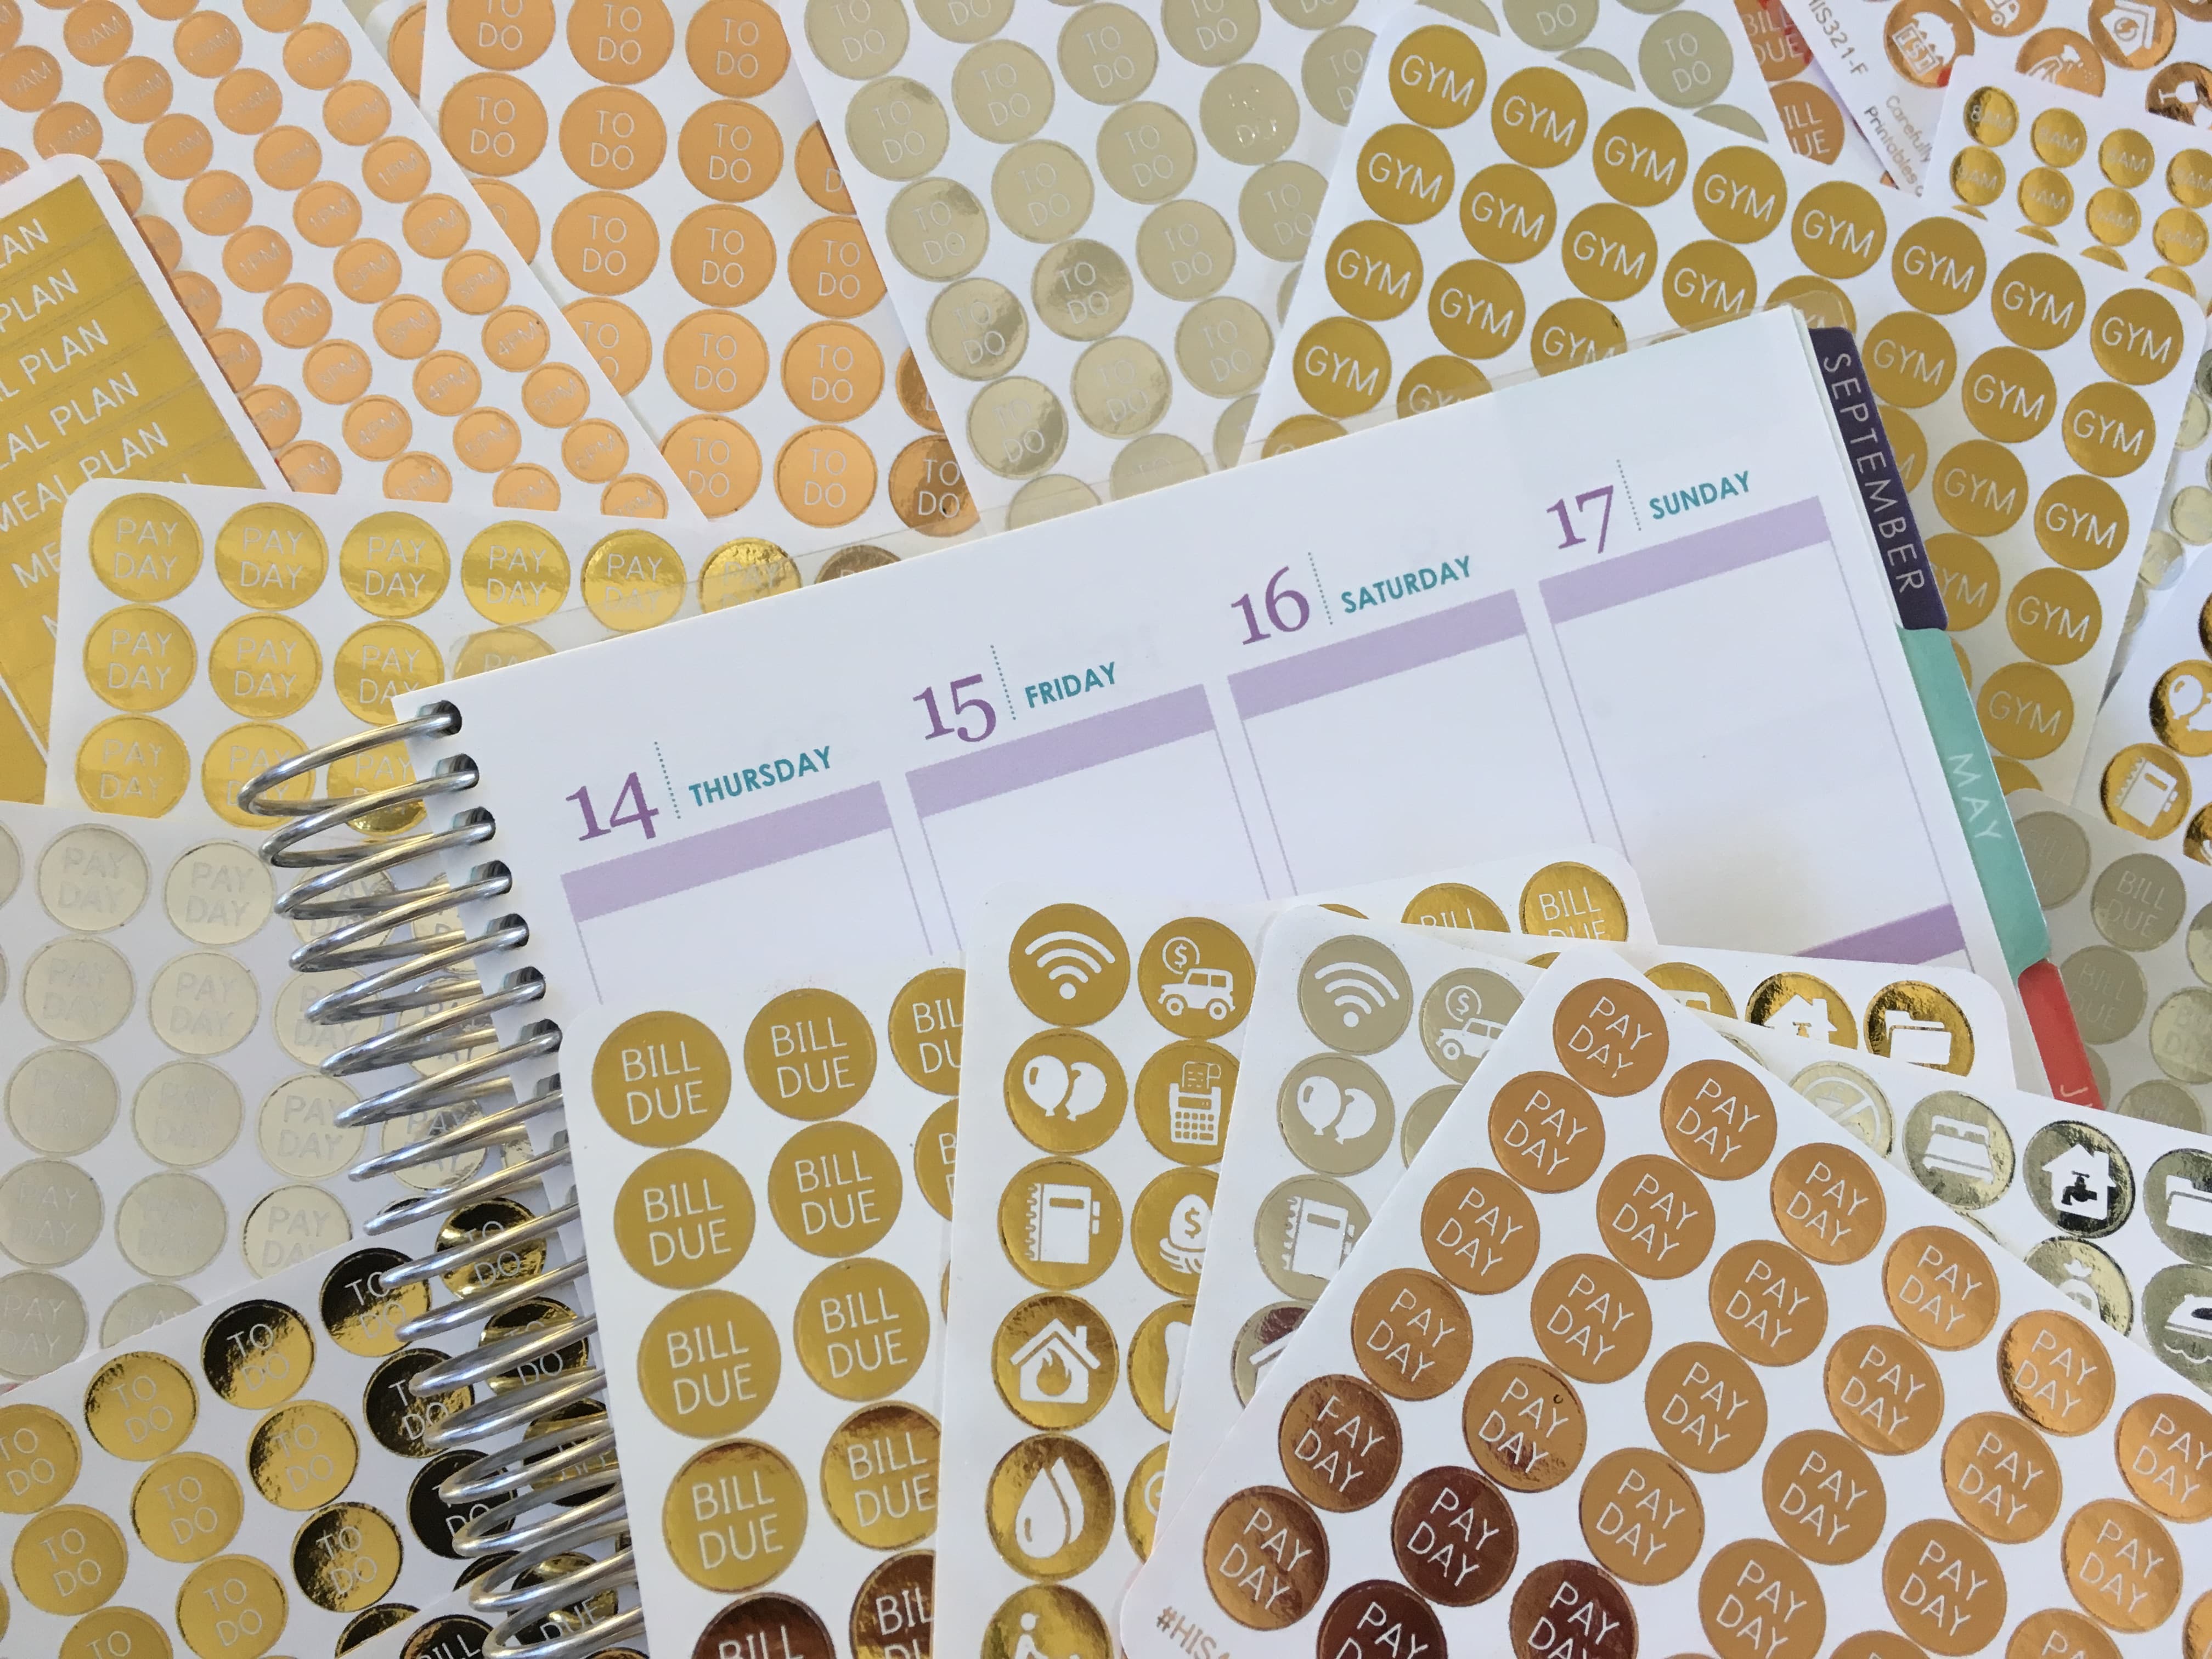 Foil planner stickers! (Gold, silver, rose gold etc.) plus the tools you need to make foil planner stickers